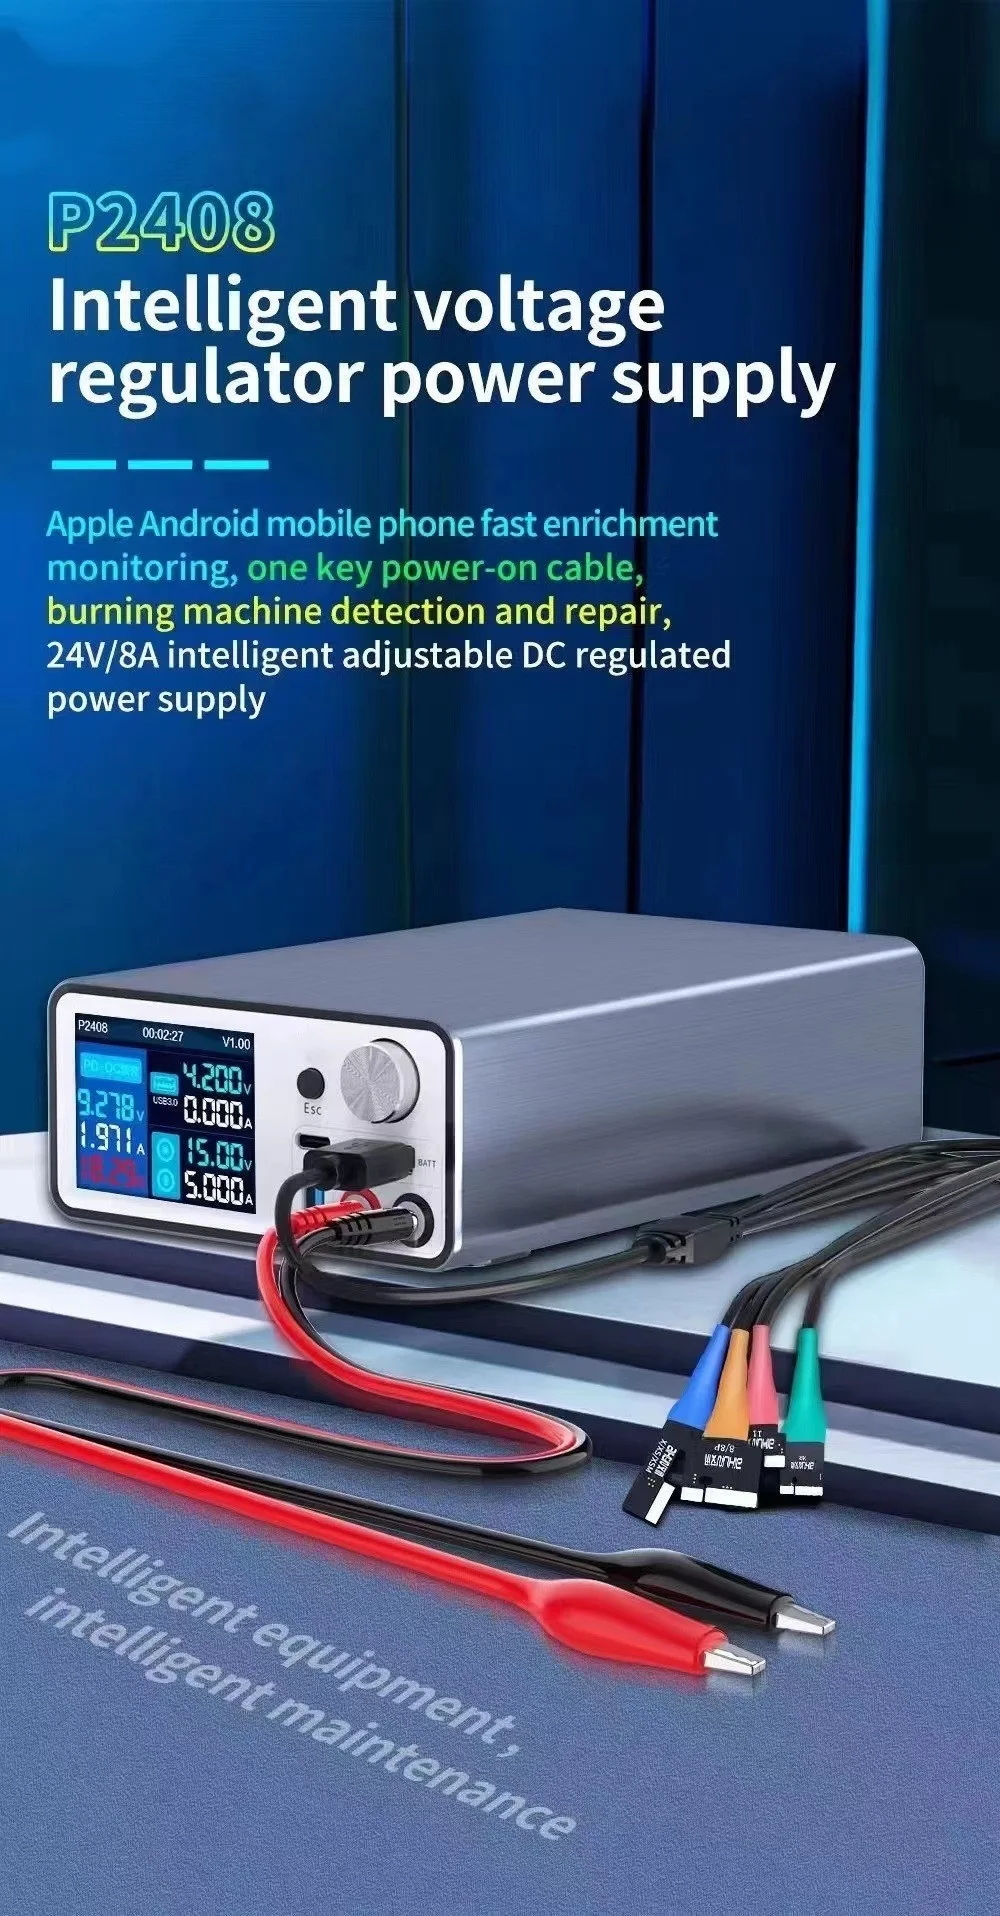 P2408 Intelligent Stabilized Power Supply With Adjustable Voltage And Current/Powerful New Updating Version enlarge